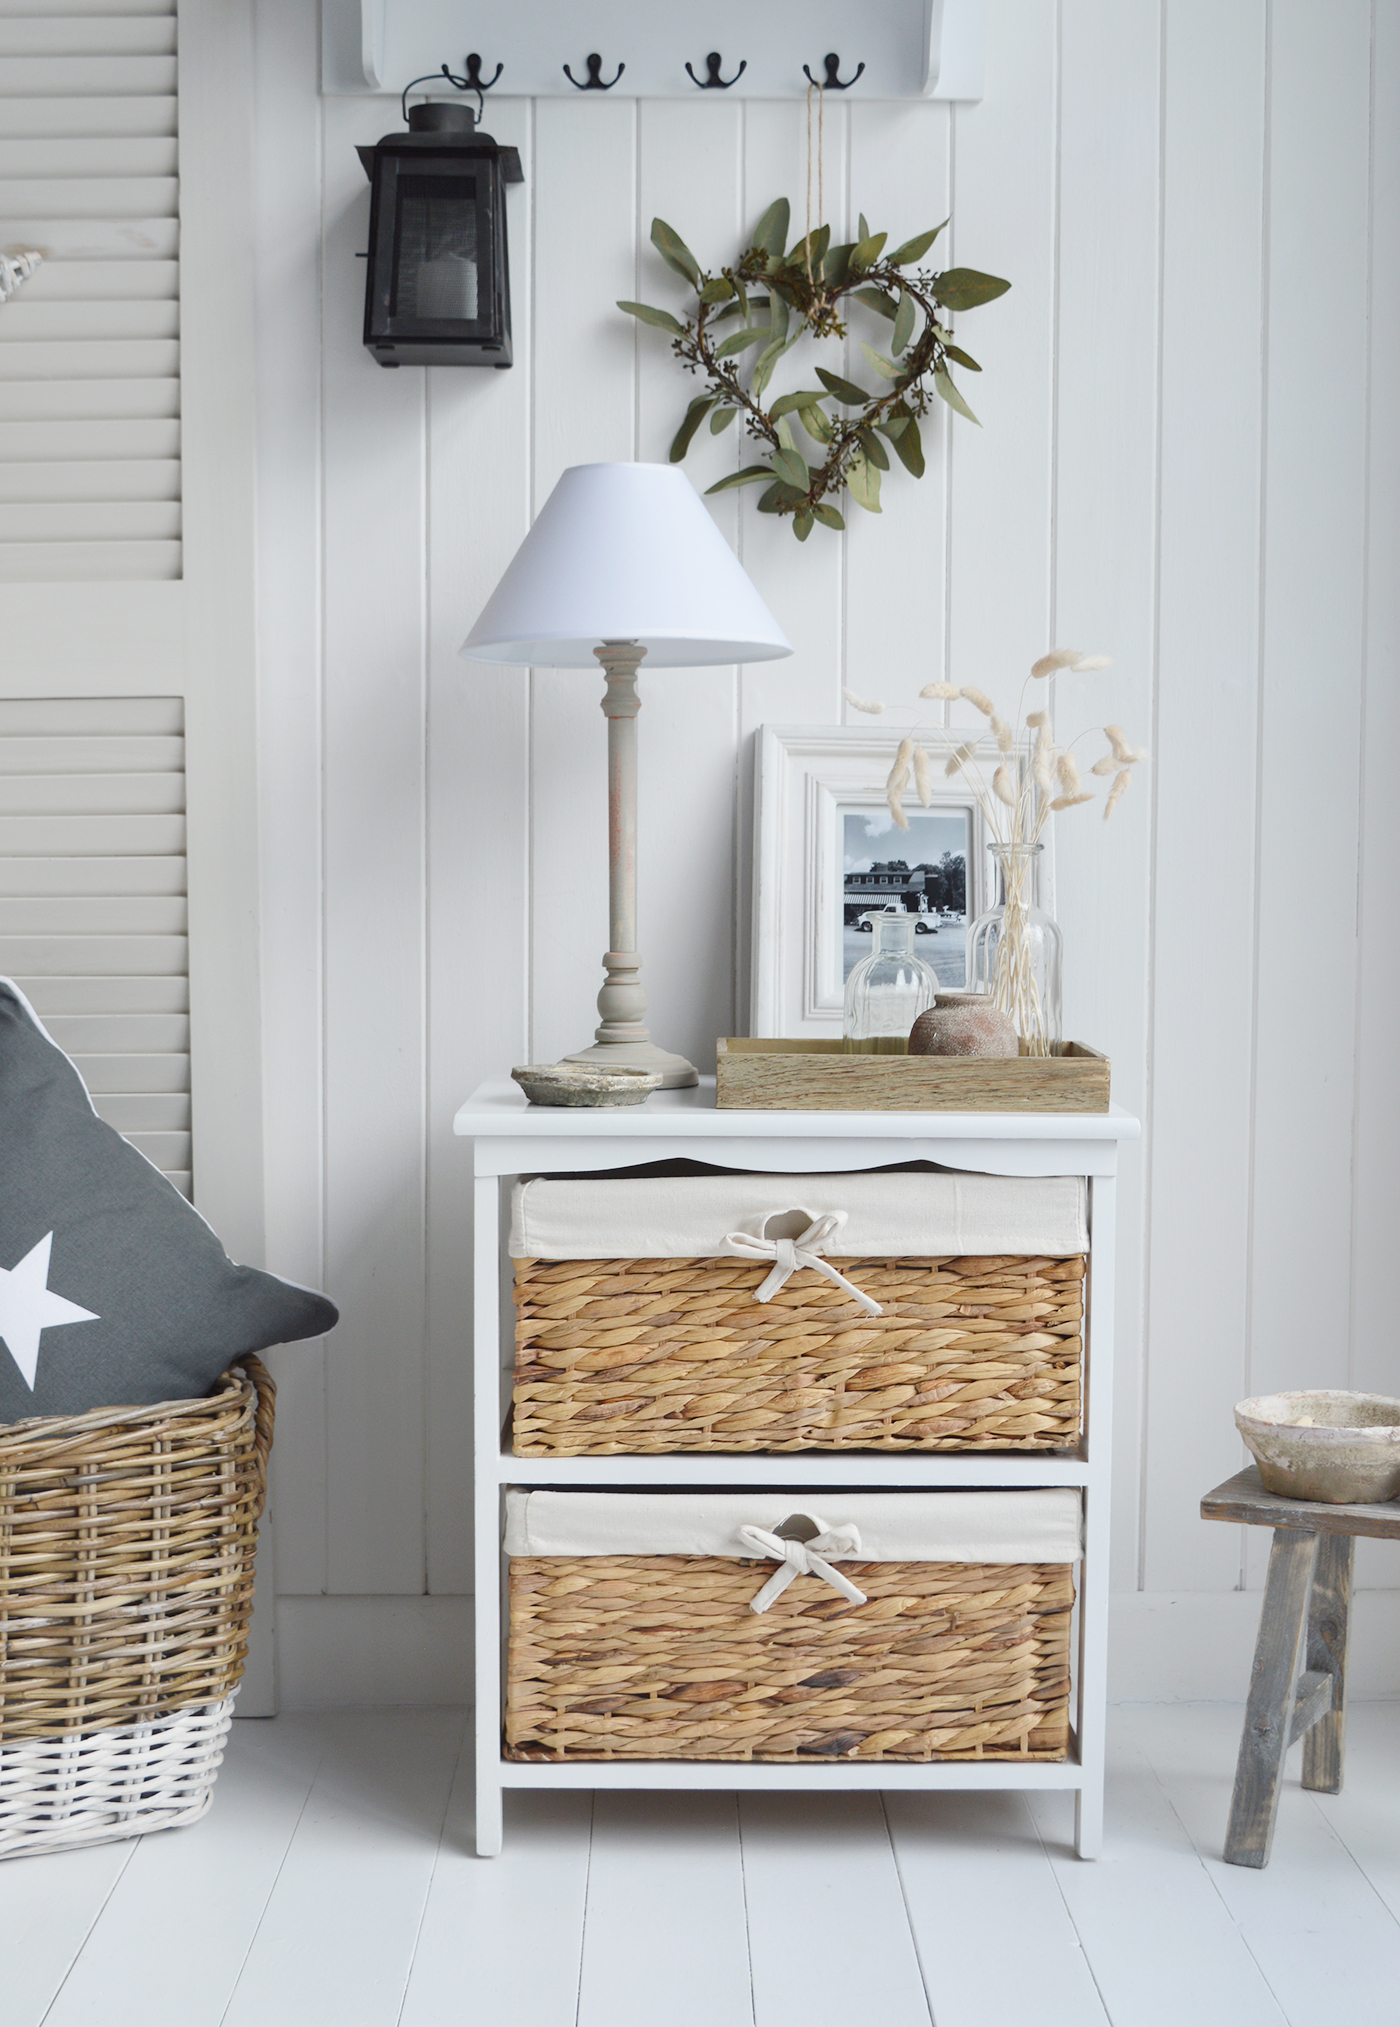 The White Lighthouse bedroom furniture. A wide white bedside table with two basket drawers for New England Country, coastal, modern farmhouse furniture and interiors, can be used as a white lamp table from The Bar Harbor range